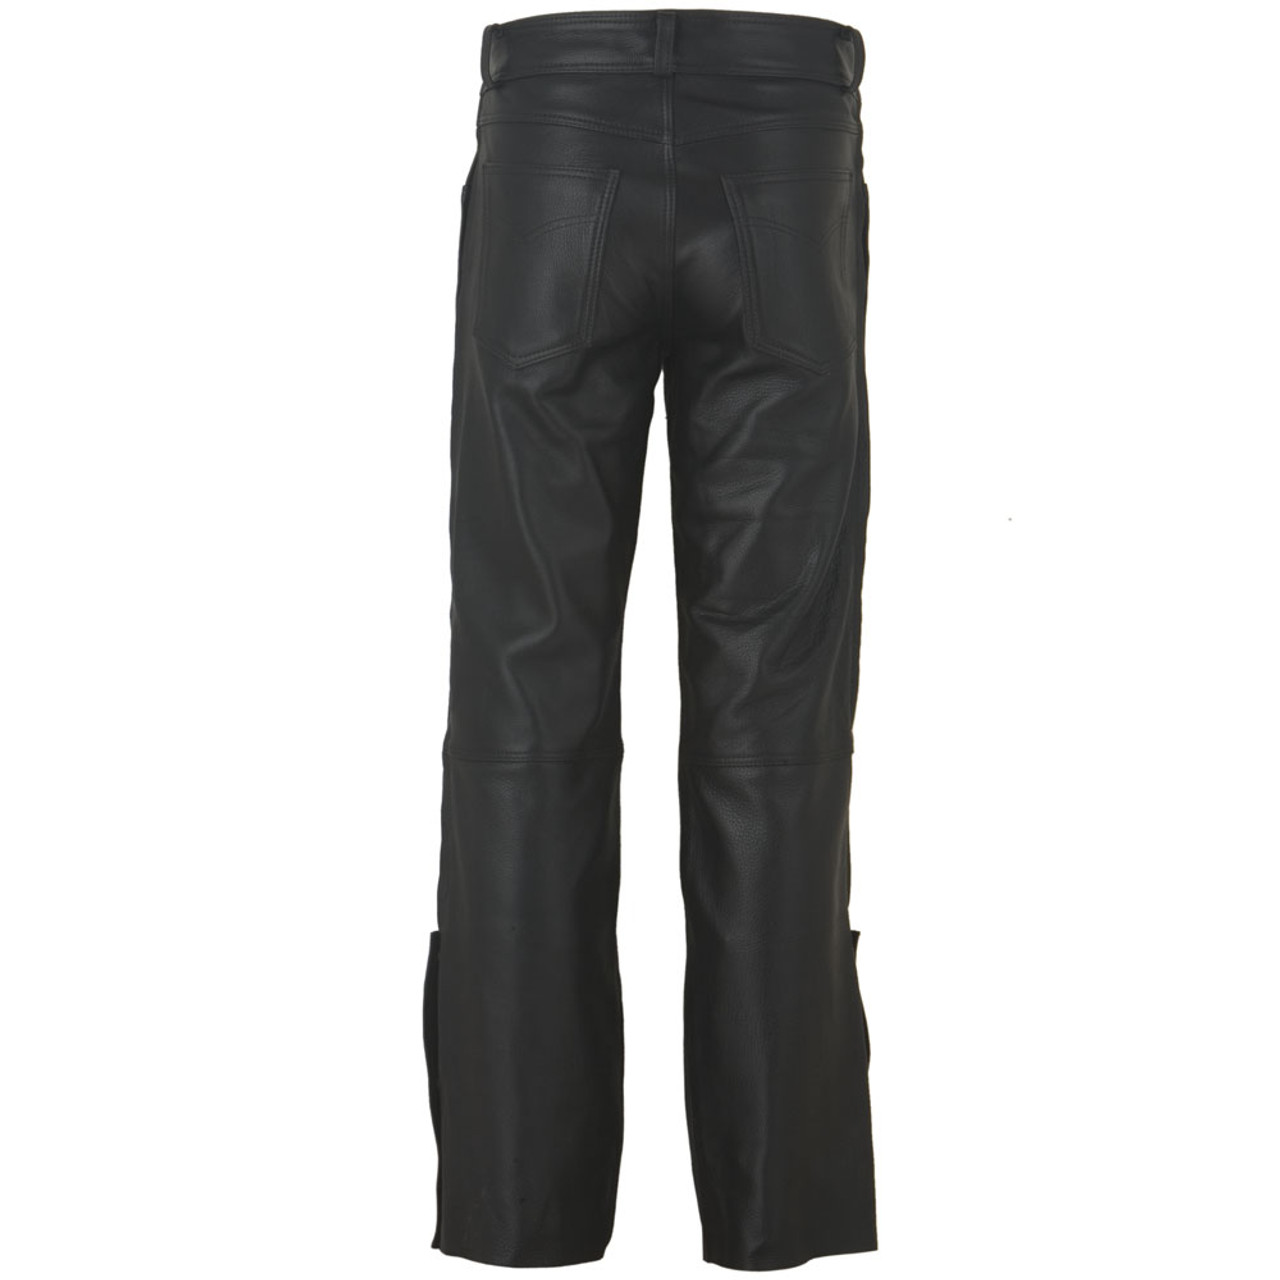 Leather Overpants - Fox Creek Leather